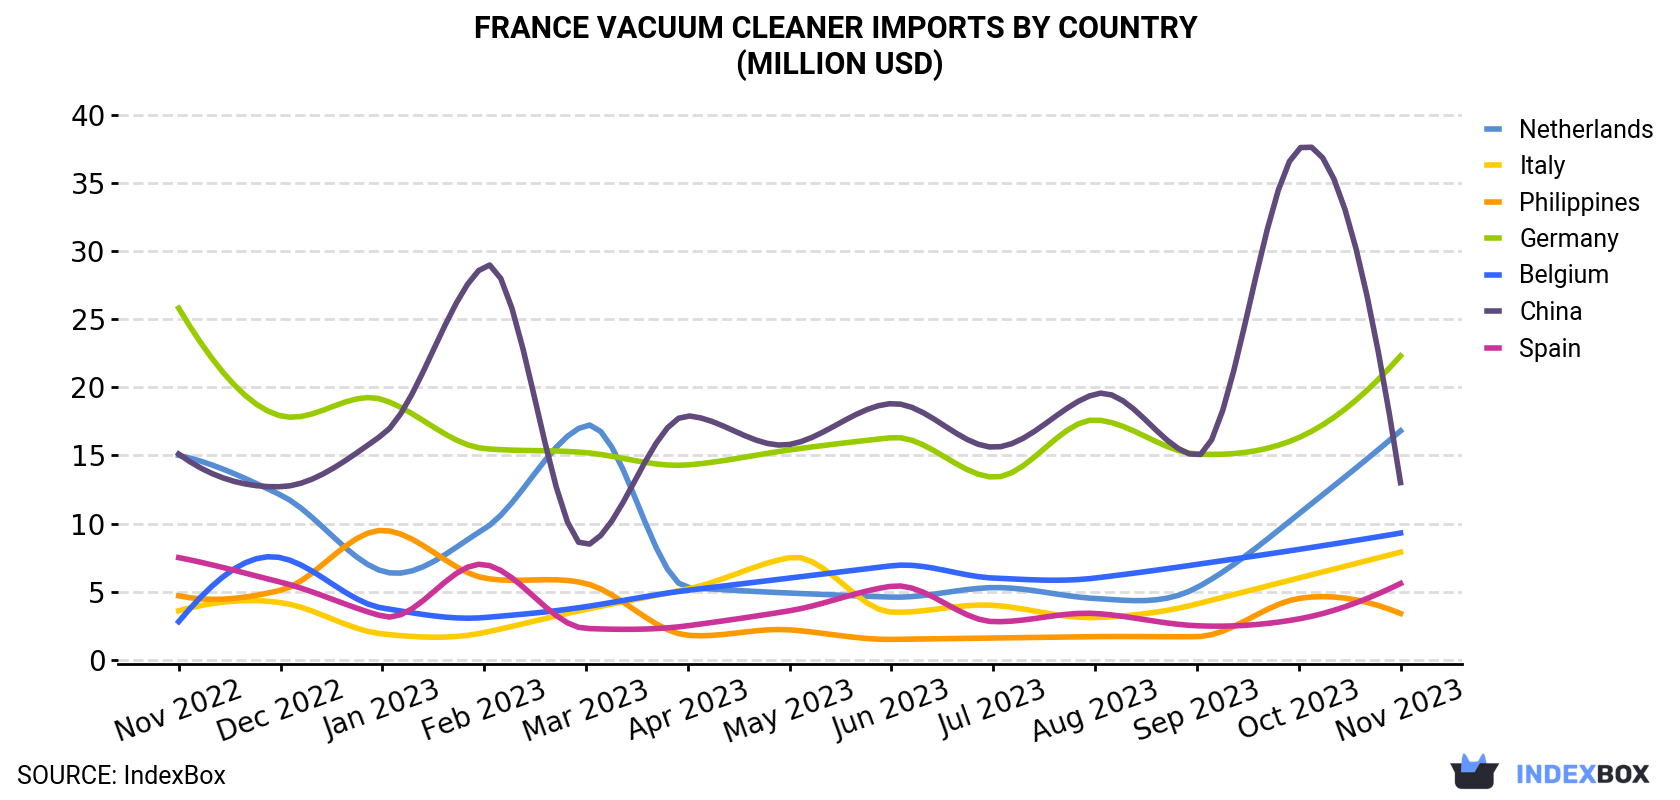 France Vacuum Cleaner Imports By Country (Million USD)